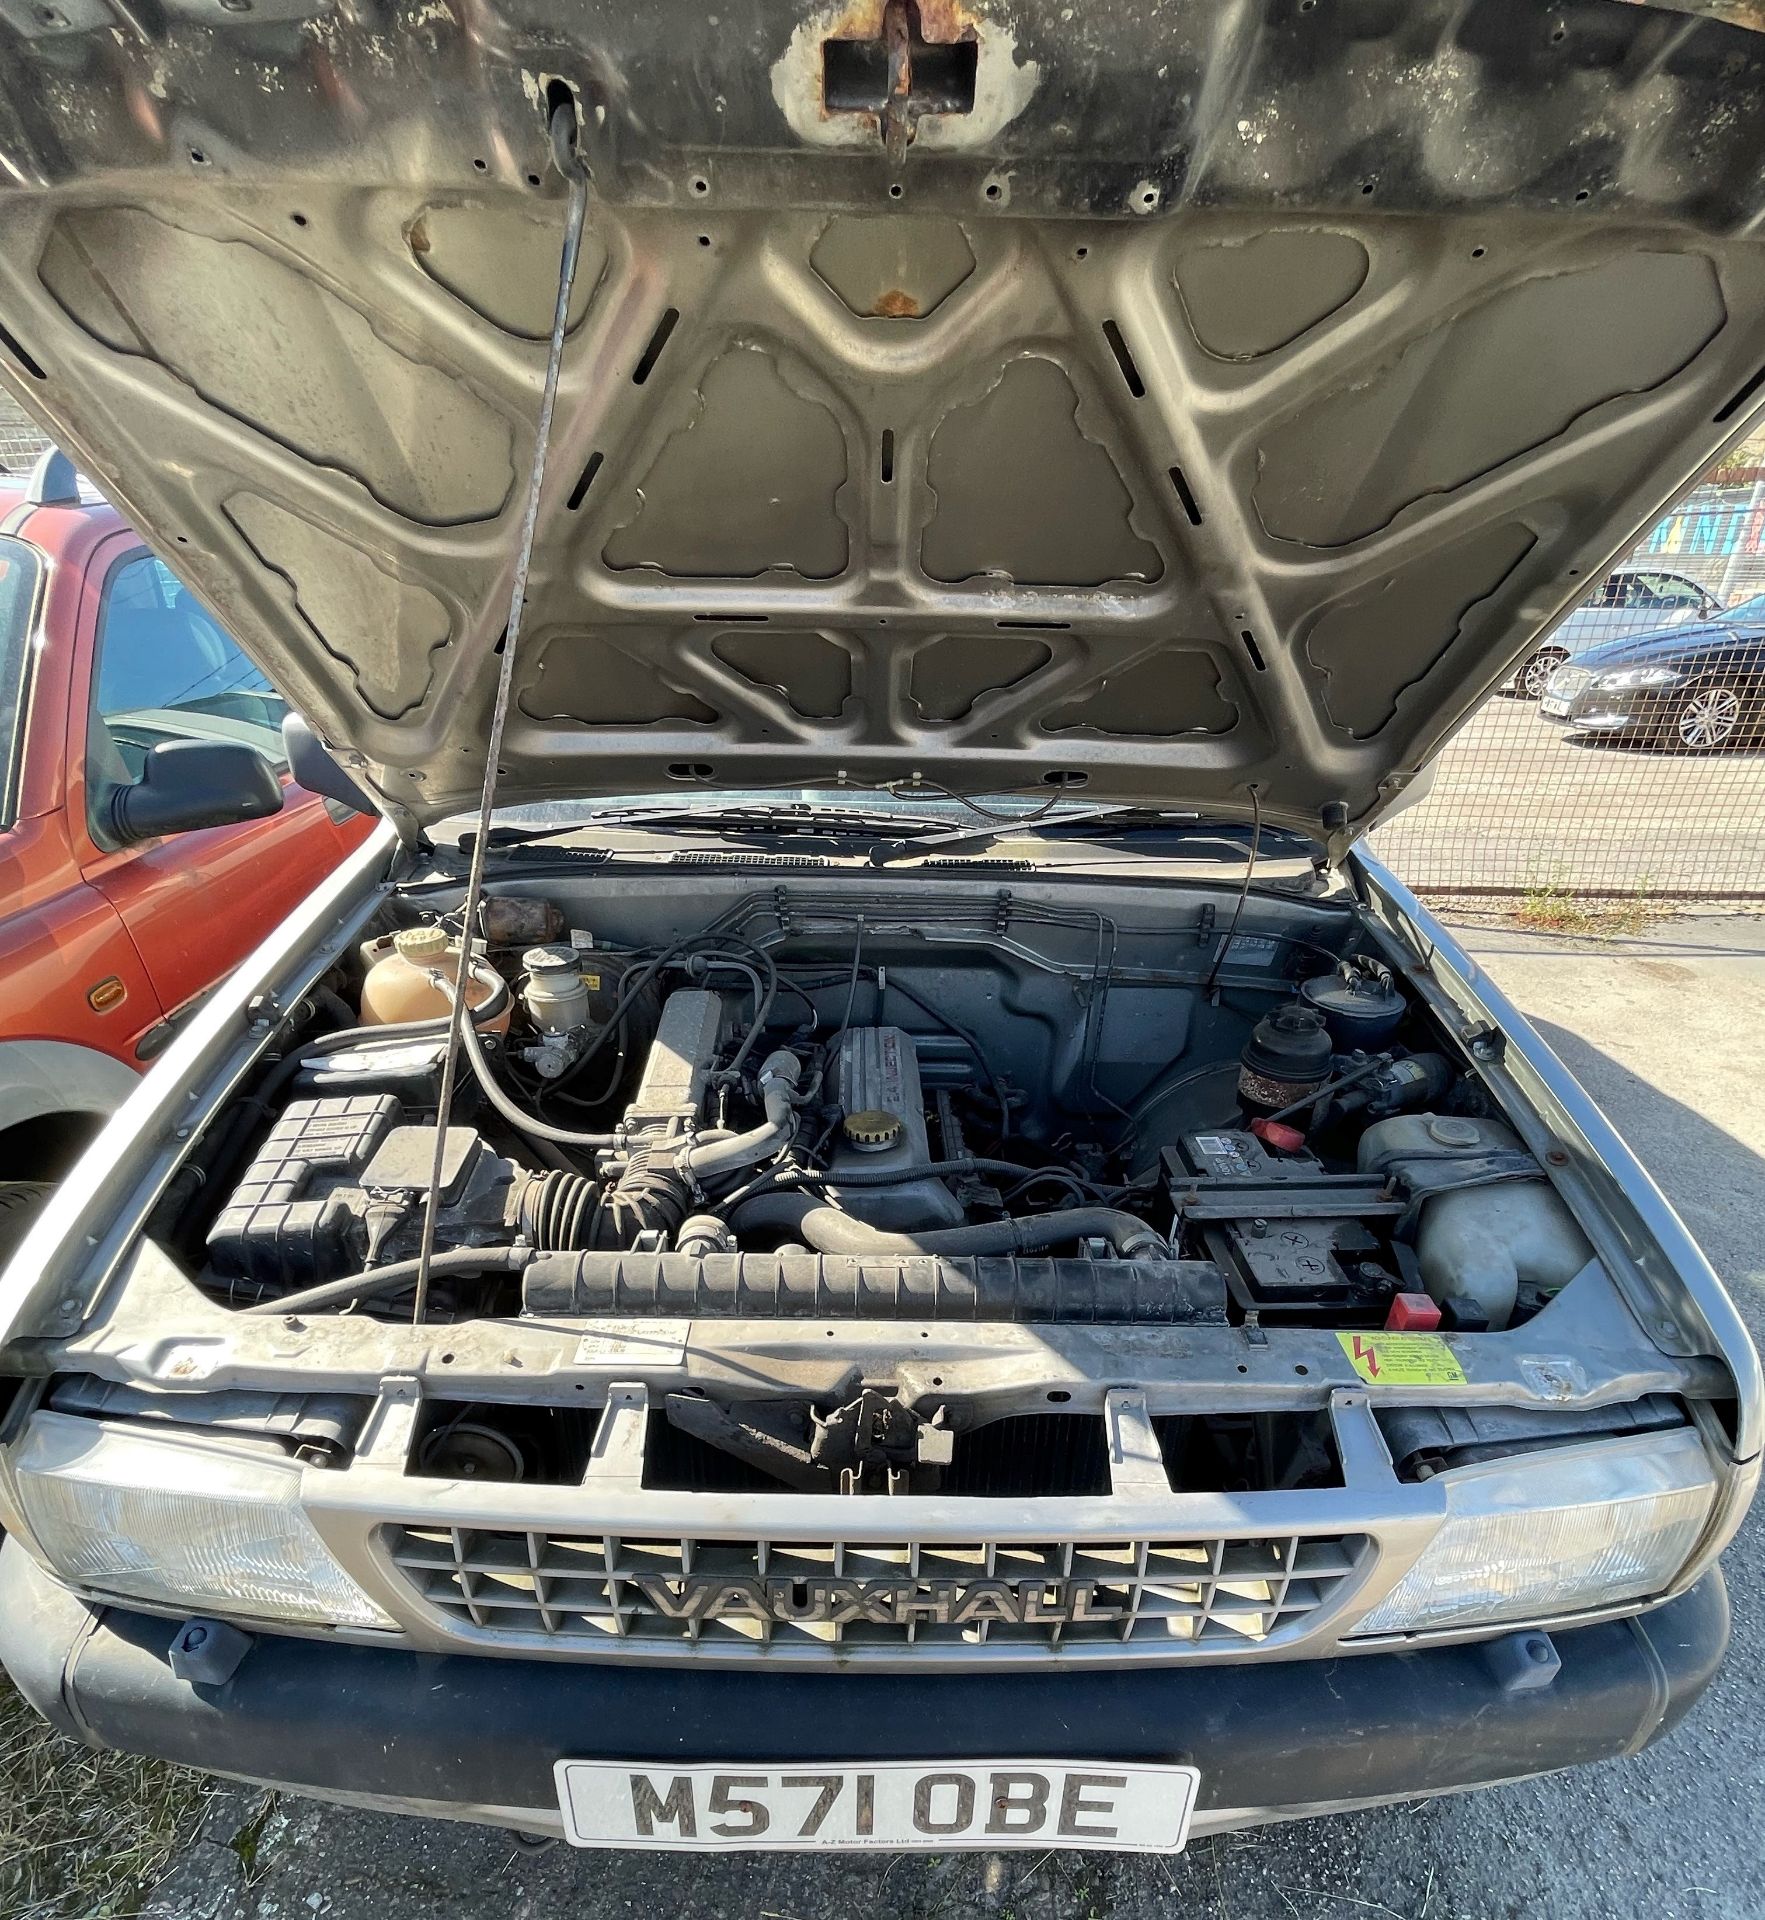 PROJECT VEHICLE FOR RESTORATION/SPARES/REPAIRS - VAUXHALL FRONTERA 2.4i ESTATE - Petrol - Grey. - Image 6 of 6